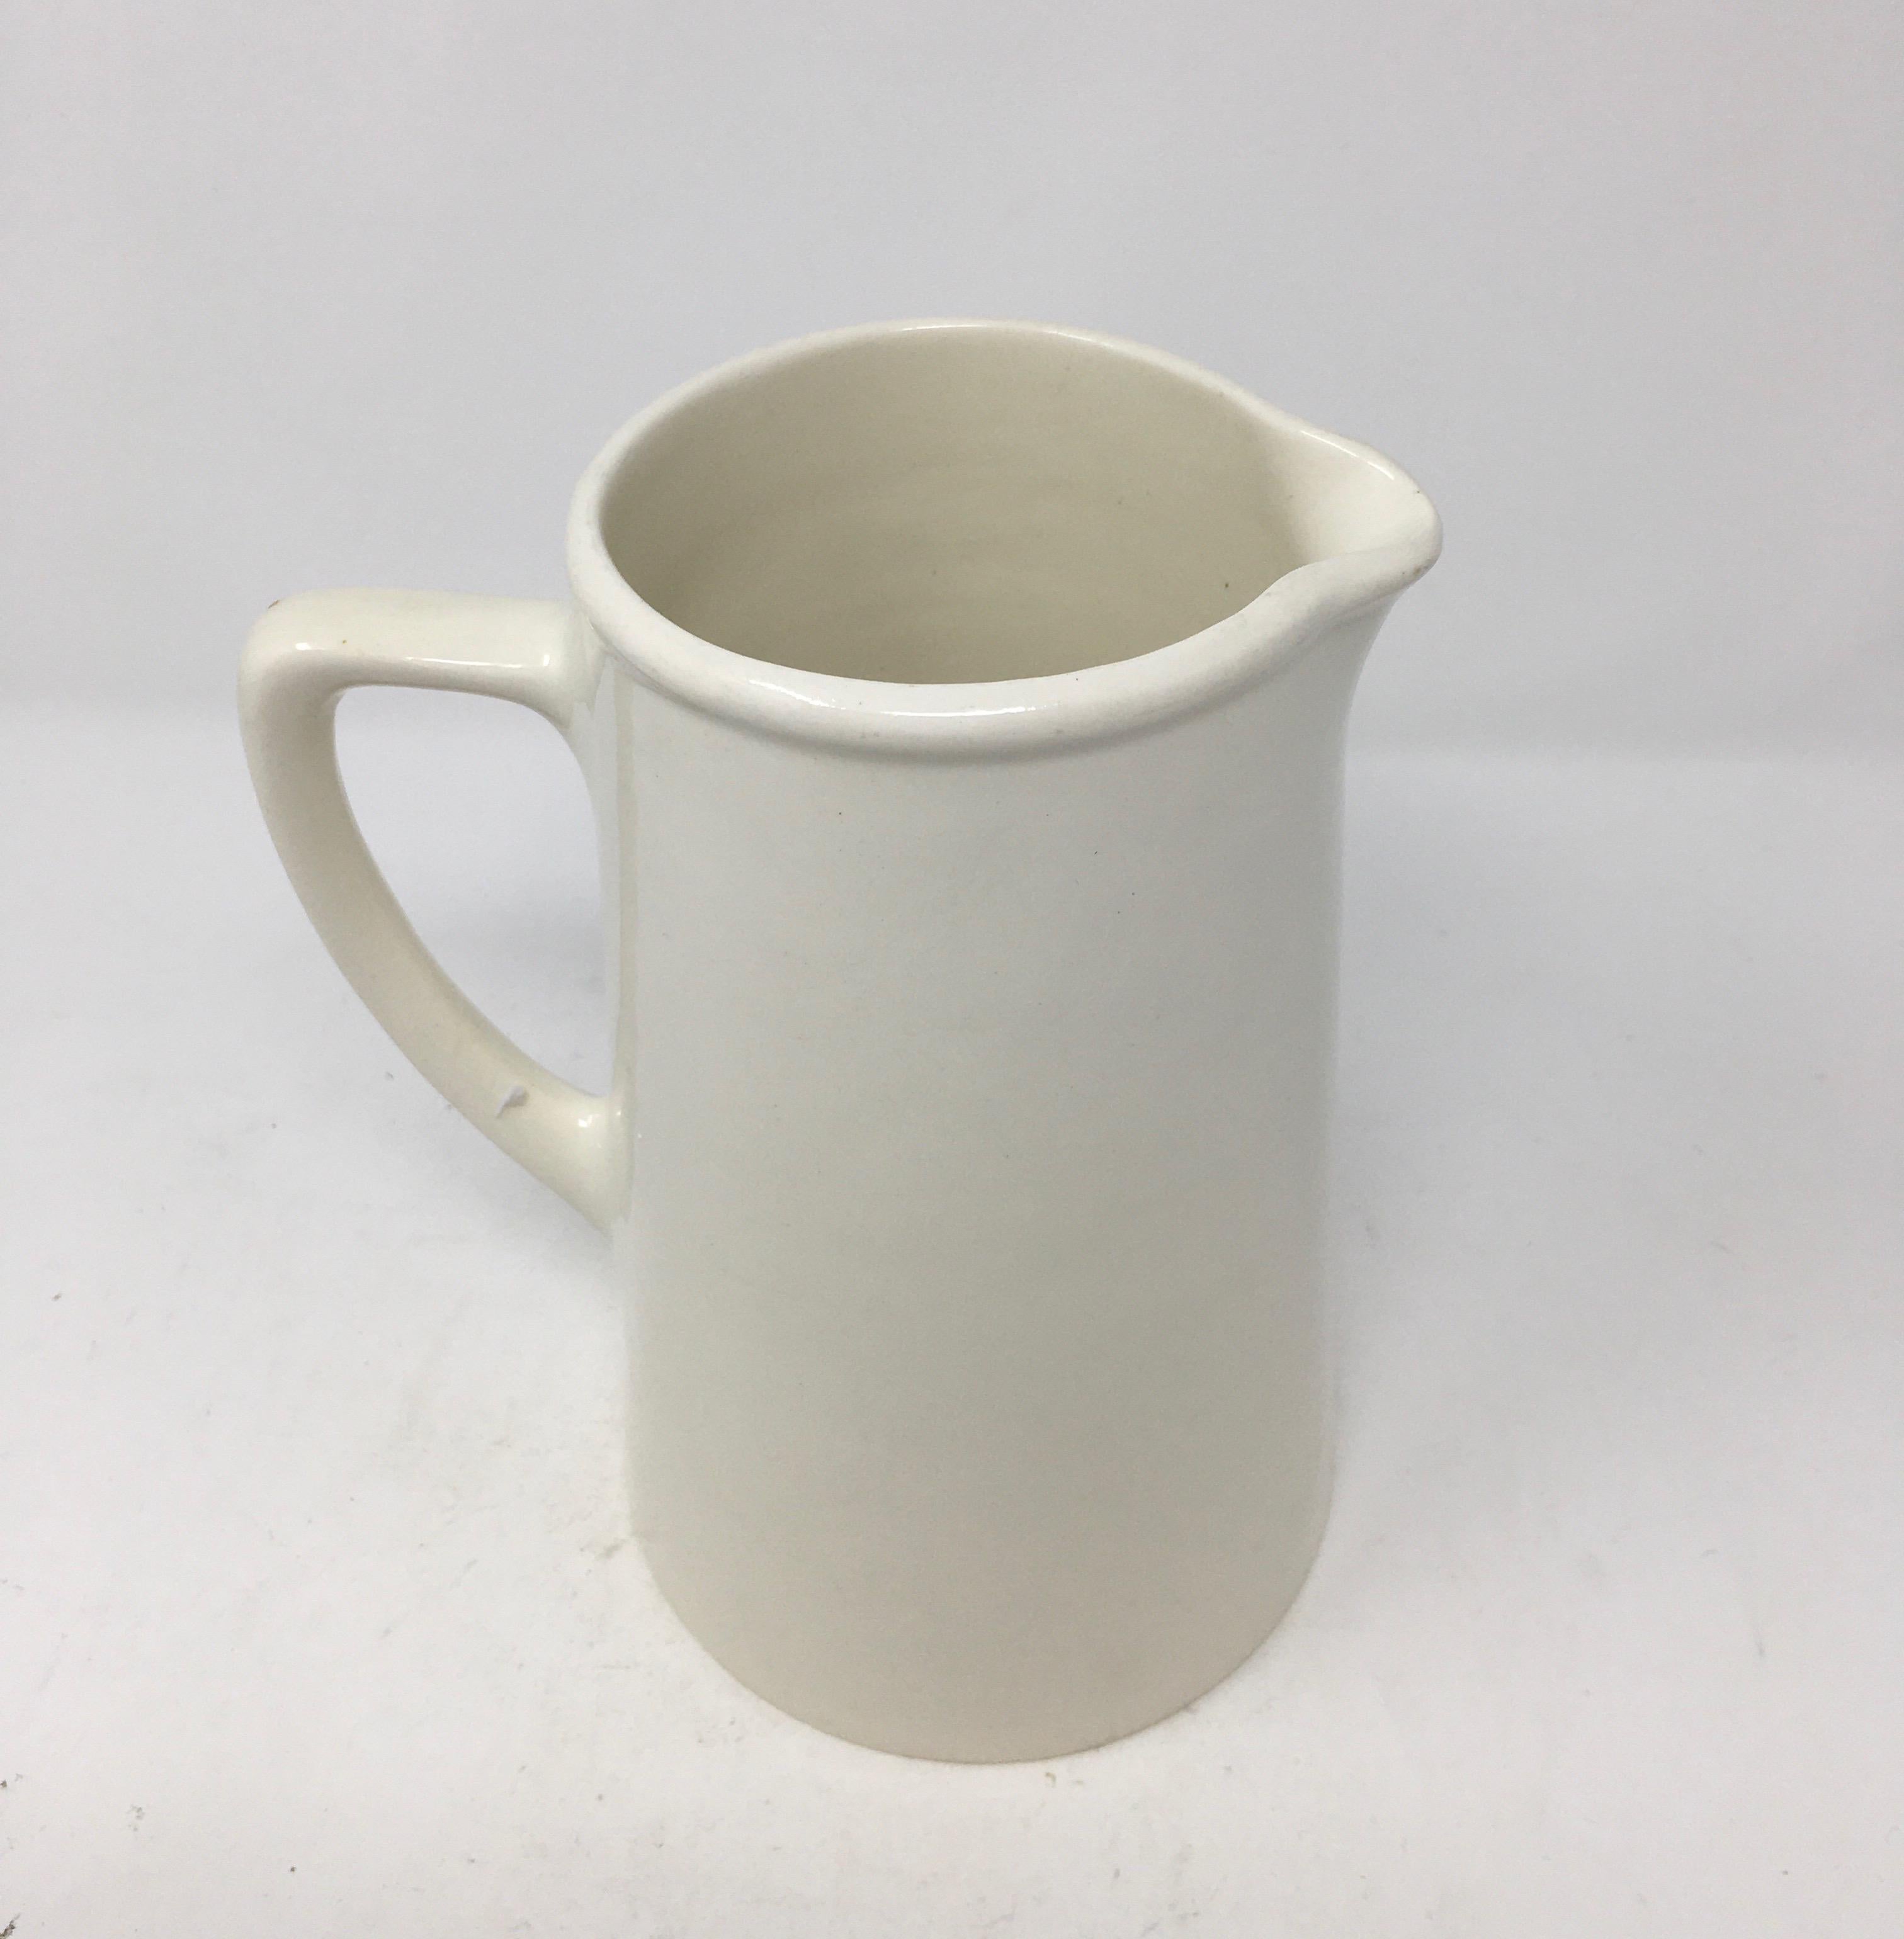 A lovely large early 20th century banded white ironstone pitcher, signed Kirkland Etruria Embassy Ware and stamped England on the bottom. This beautiful pitcher has simple clean lines, perfect for any decor. It would be a wonderful addition to a